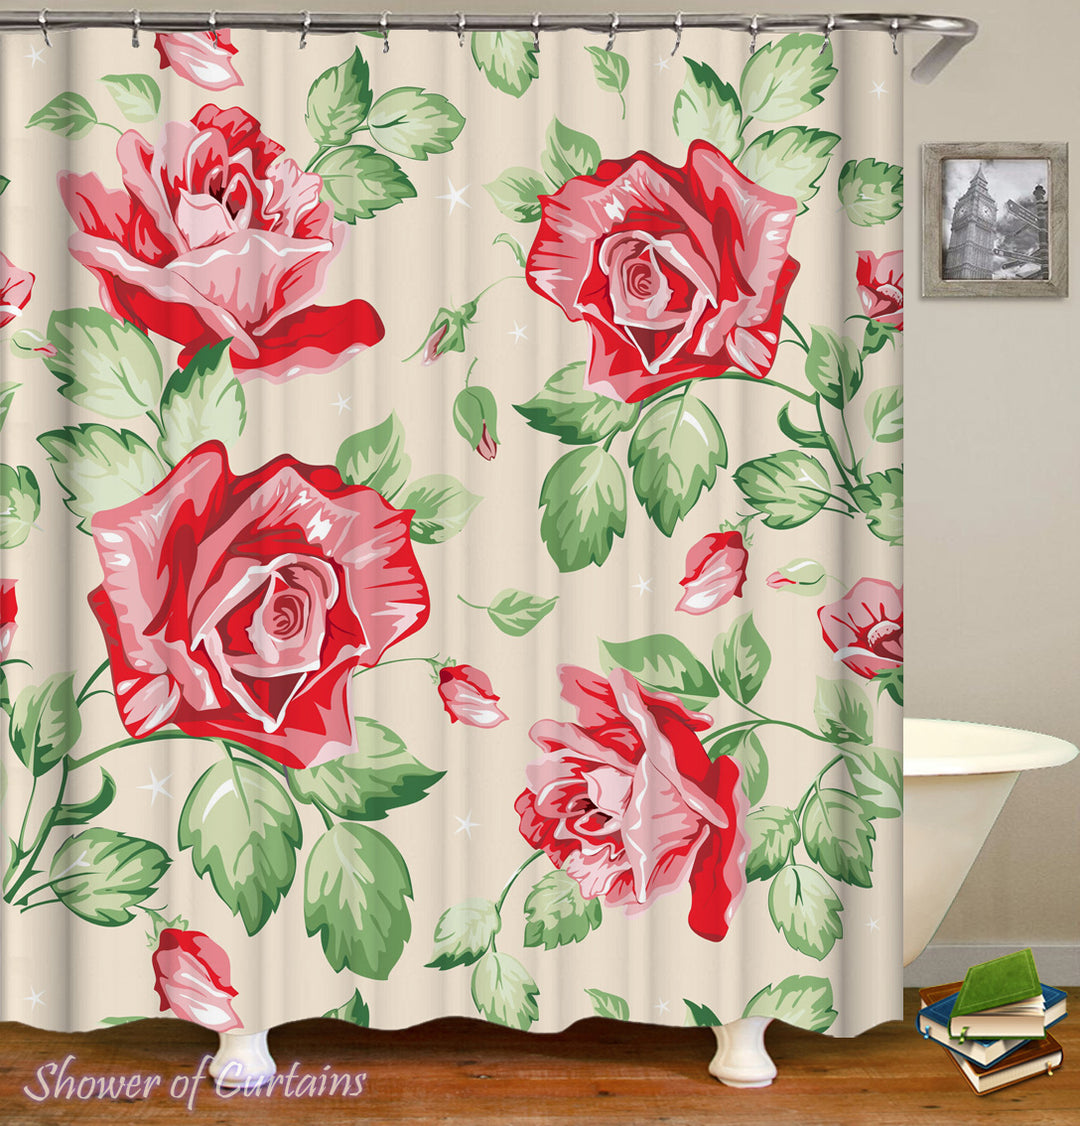 Floral Shower Curtain - Classic Roses Drawing